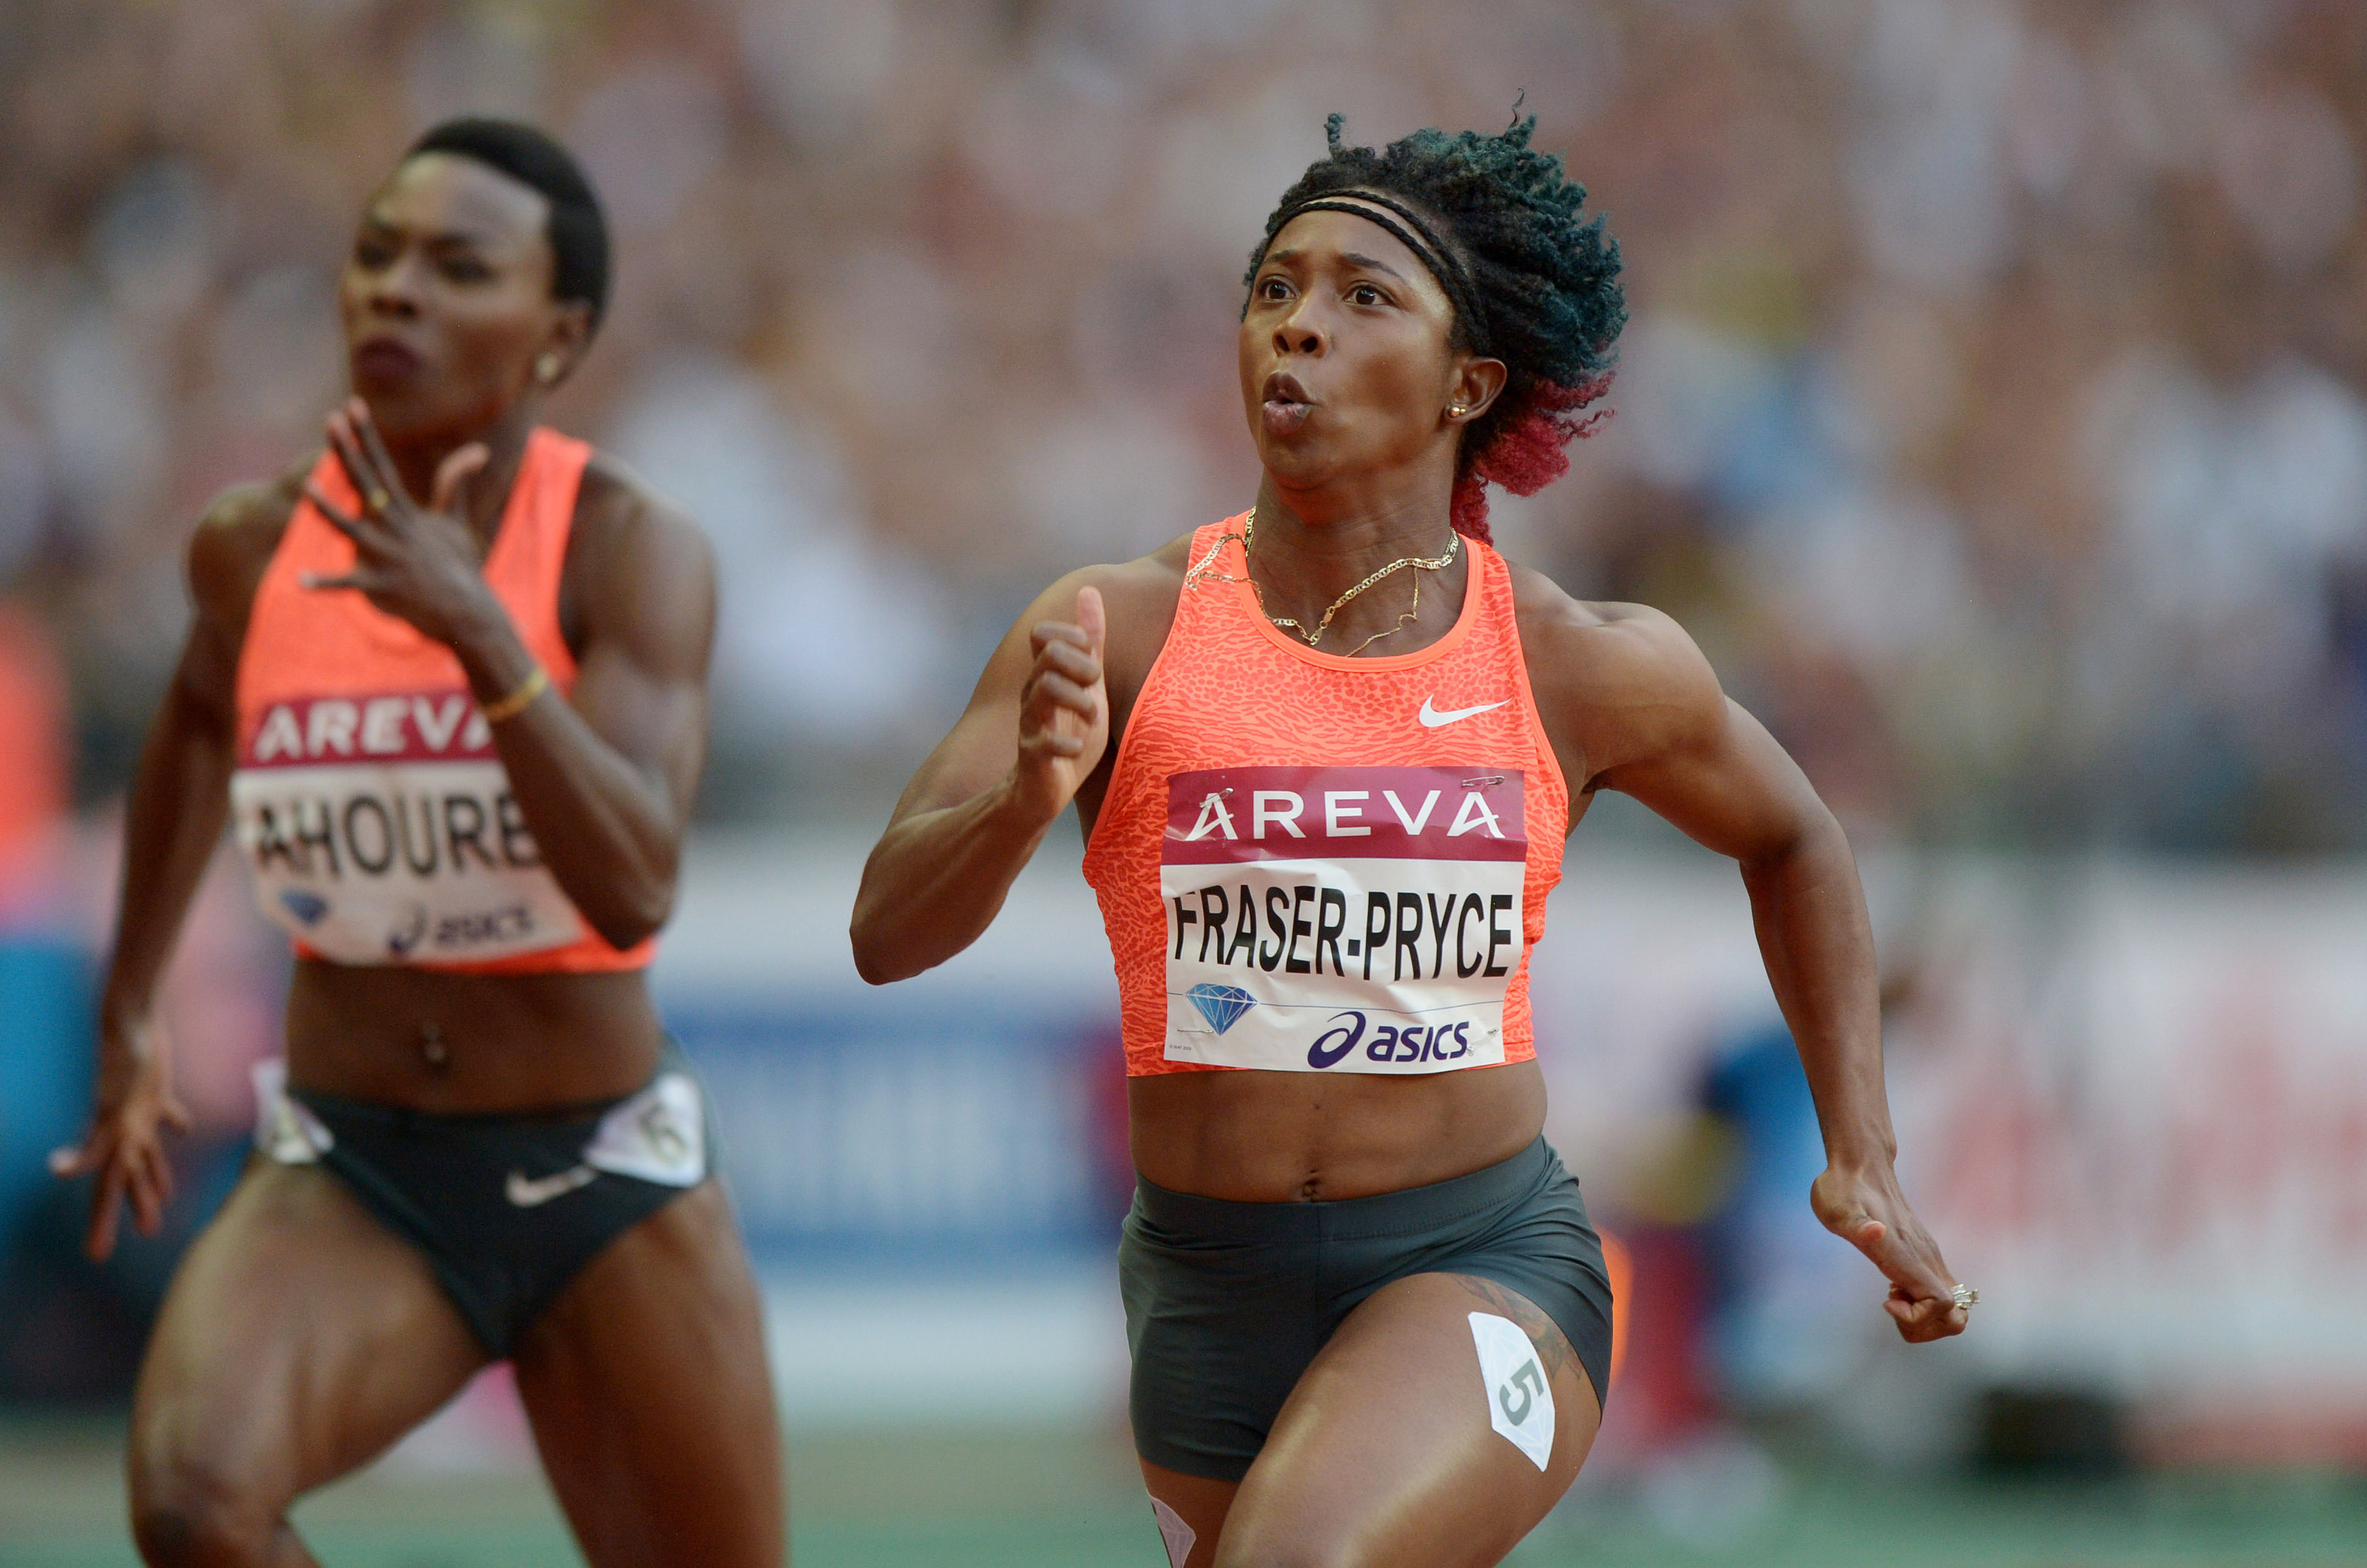 Jamaica's Shelly-Ann Fraser-Pryce cruises to a 100m win in Stockholm. Photo: USA Today